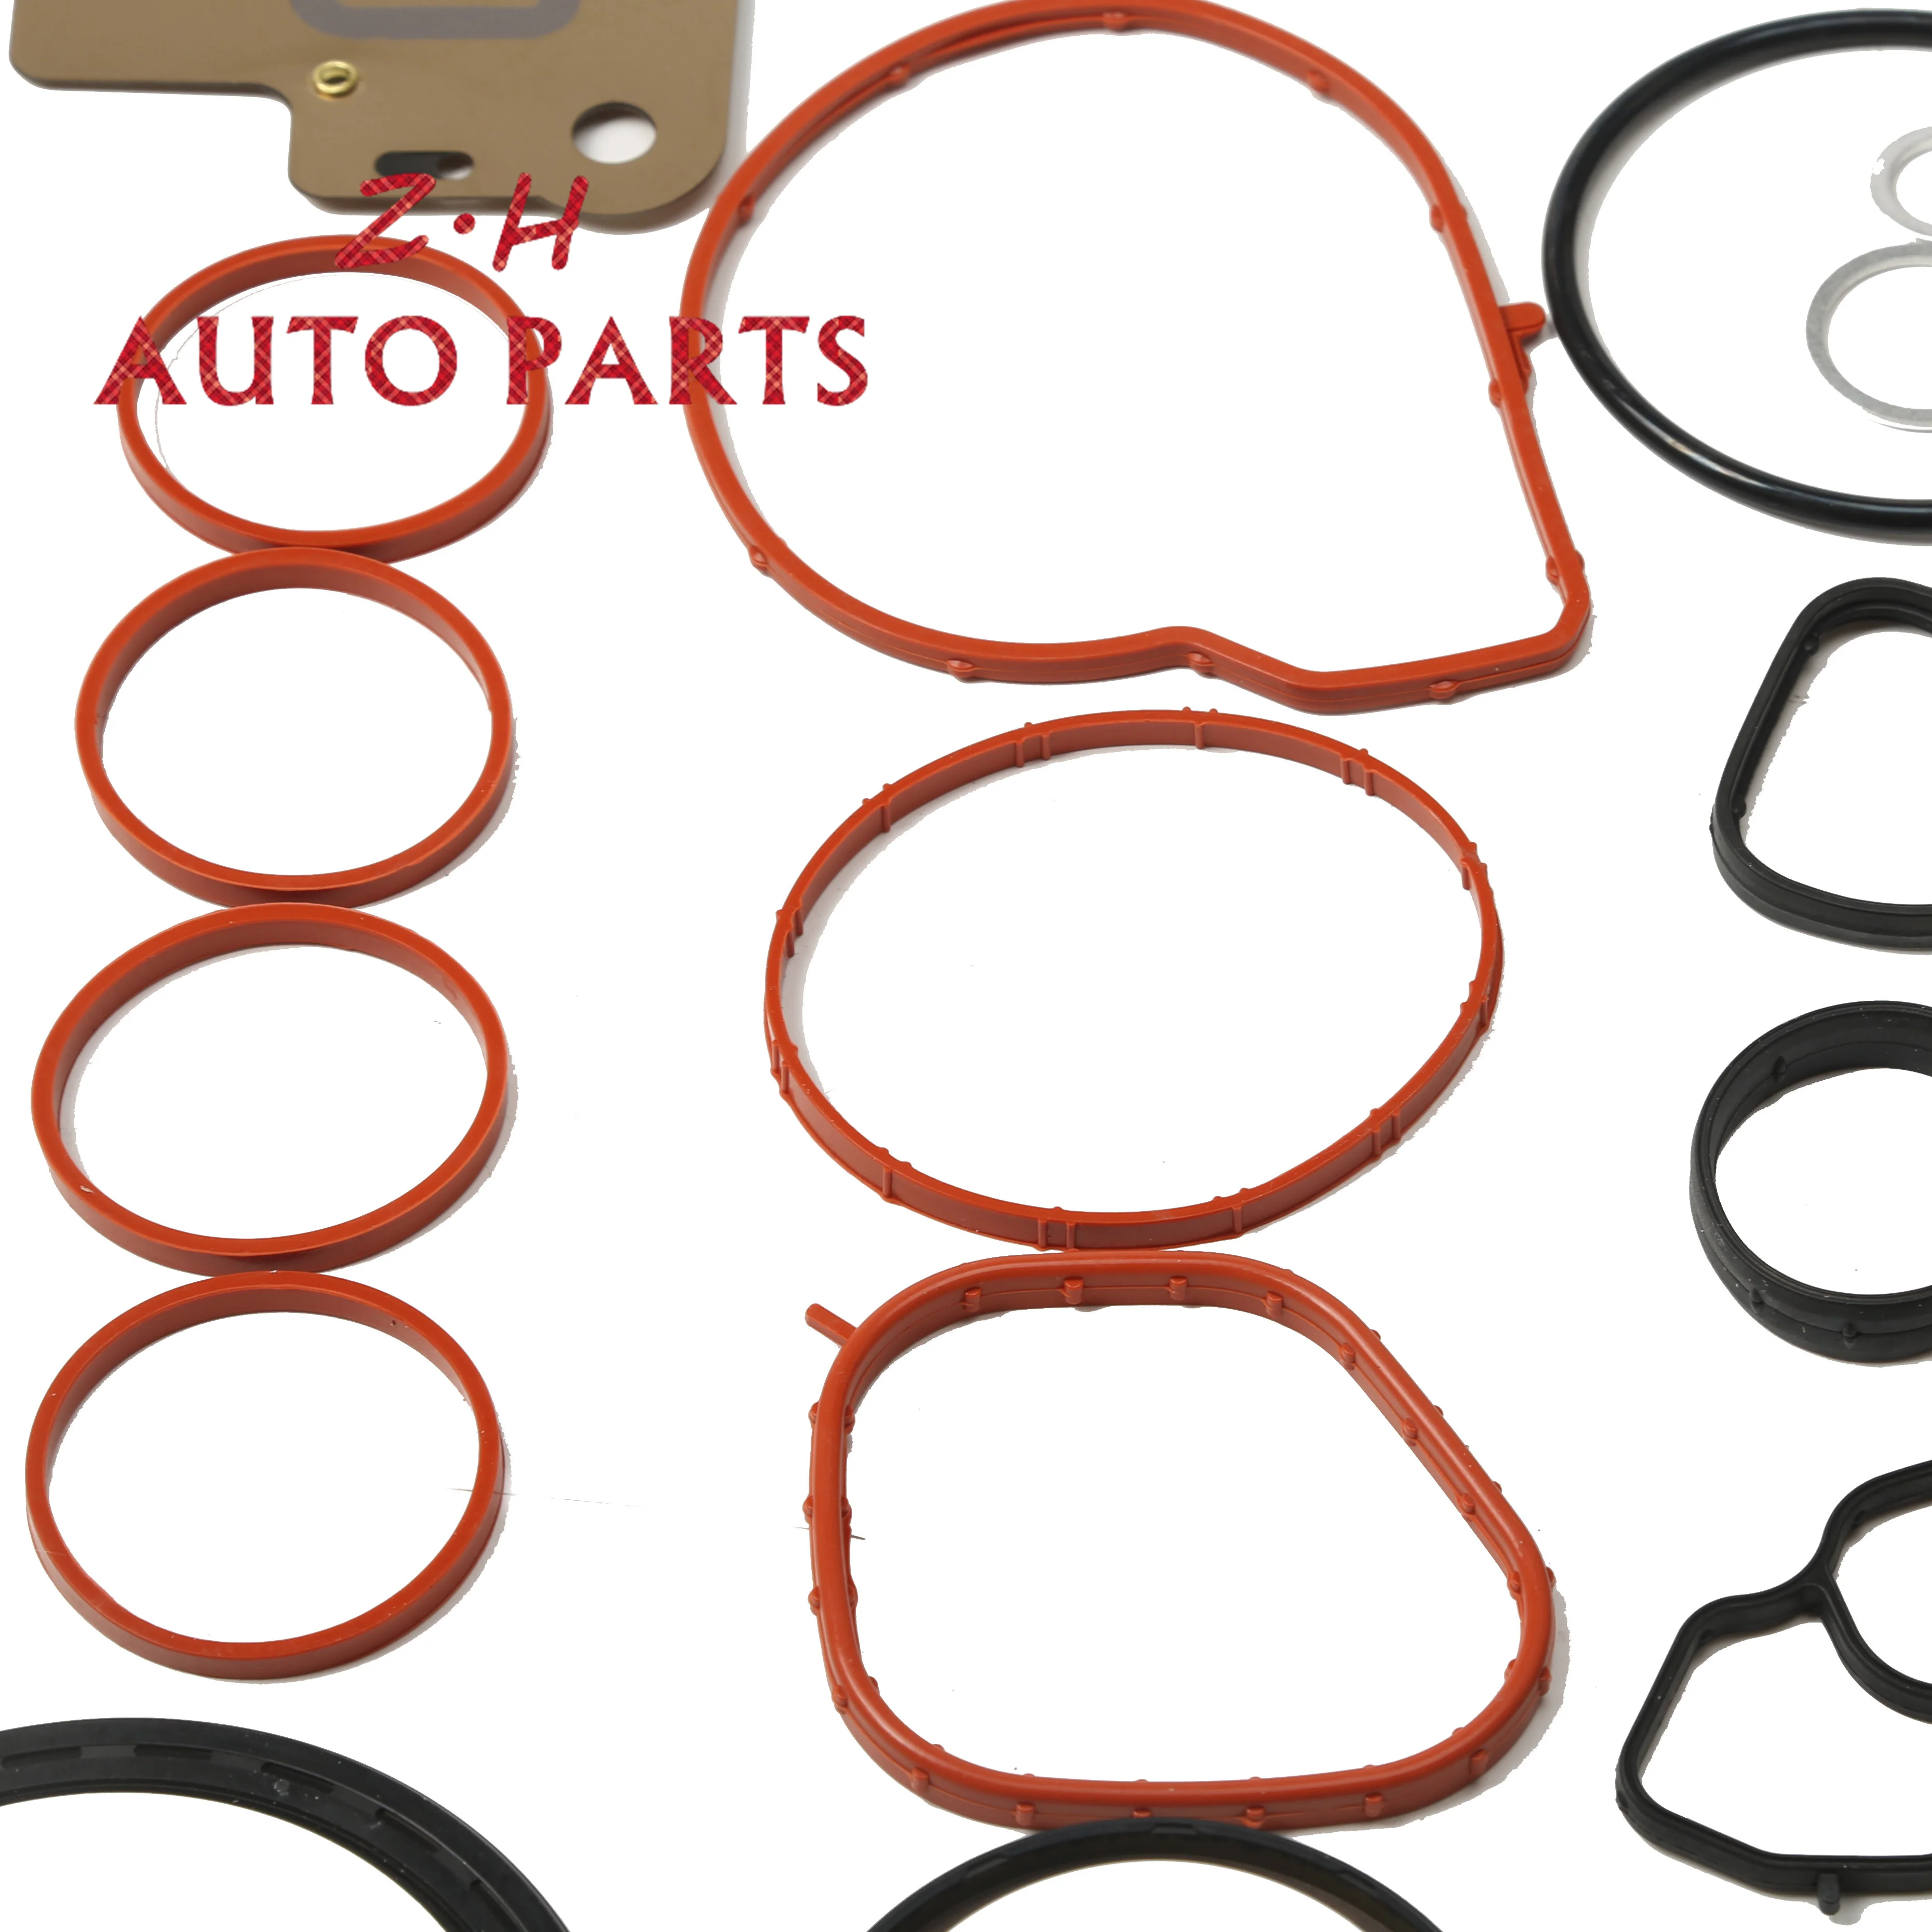 Car Engine Repair Kit For MINI R56 One Convertible R57 COUNTRYMAN R60 Coupe R58 Roadster R59 2011-2015 11428463758 11127570859 images - 6